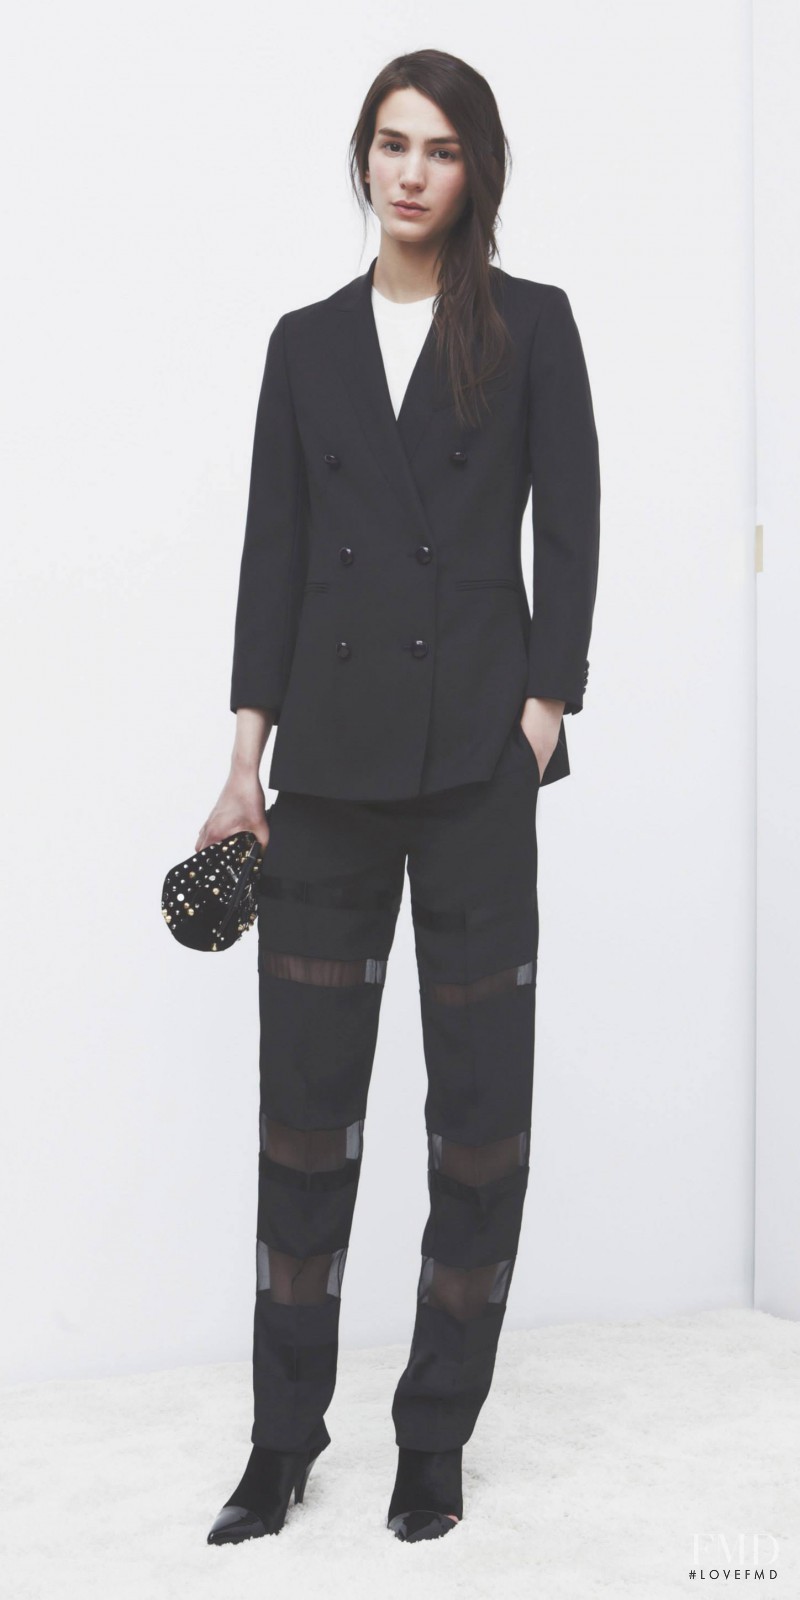 Mijo Mihaljcic featured in  the 3.1 Phillip Lim fashion show for Holiday 2013